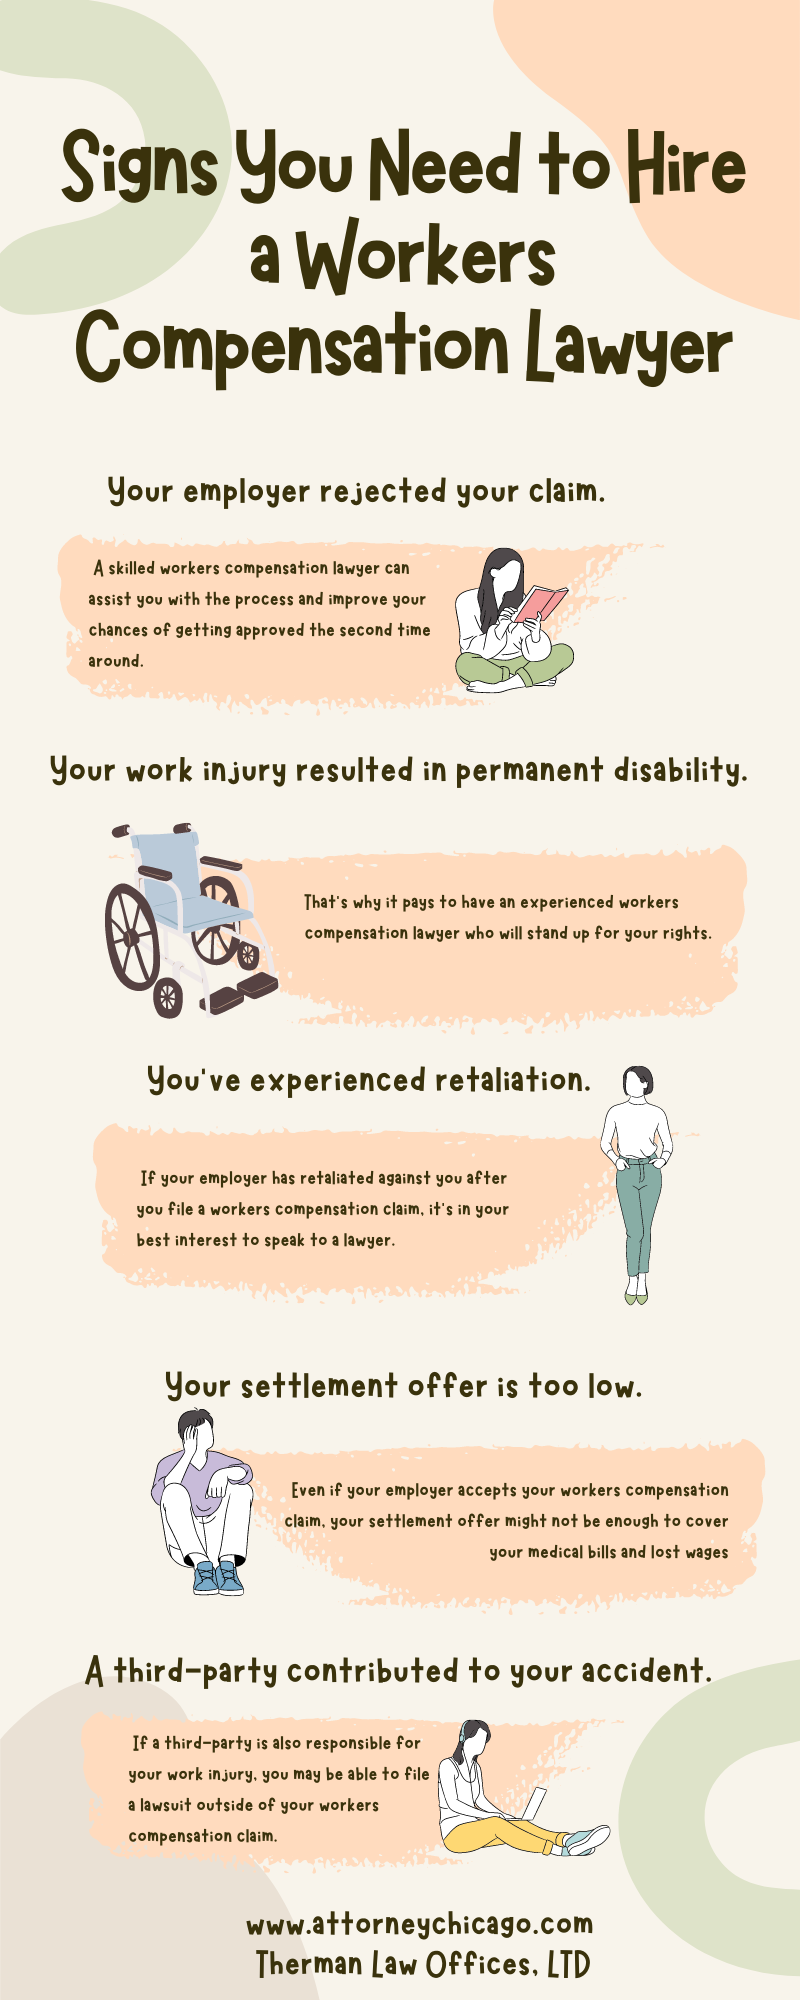 Schaumburg Workers Compensation Lawyer Infographic